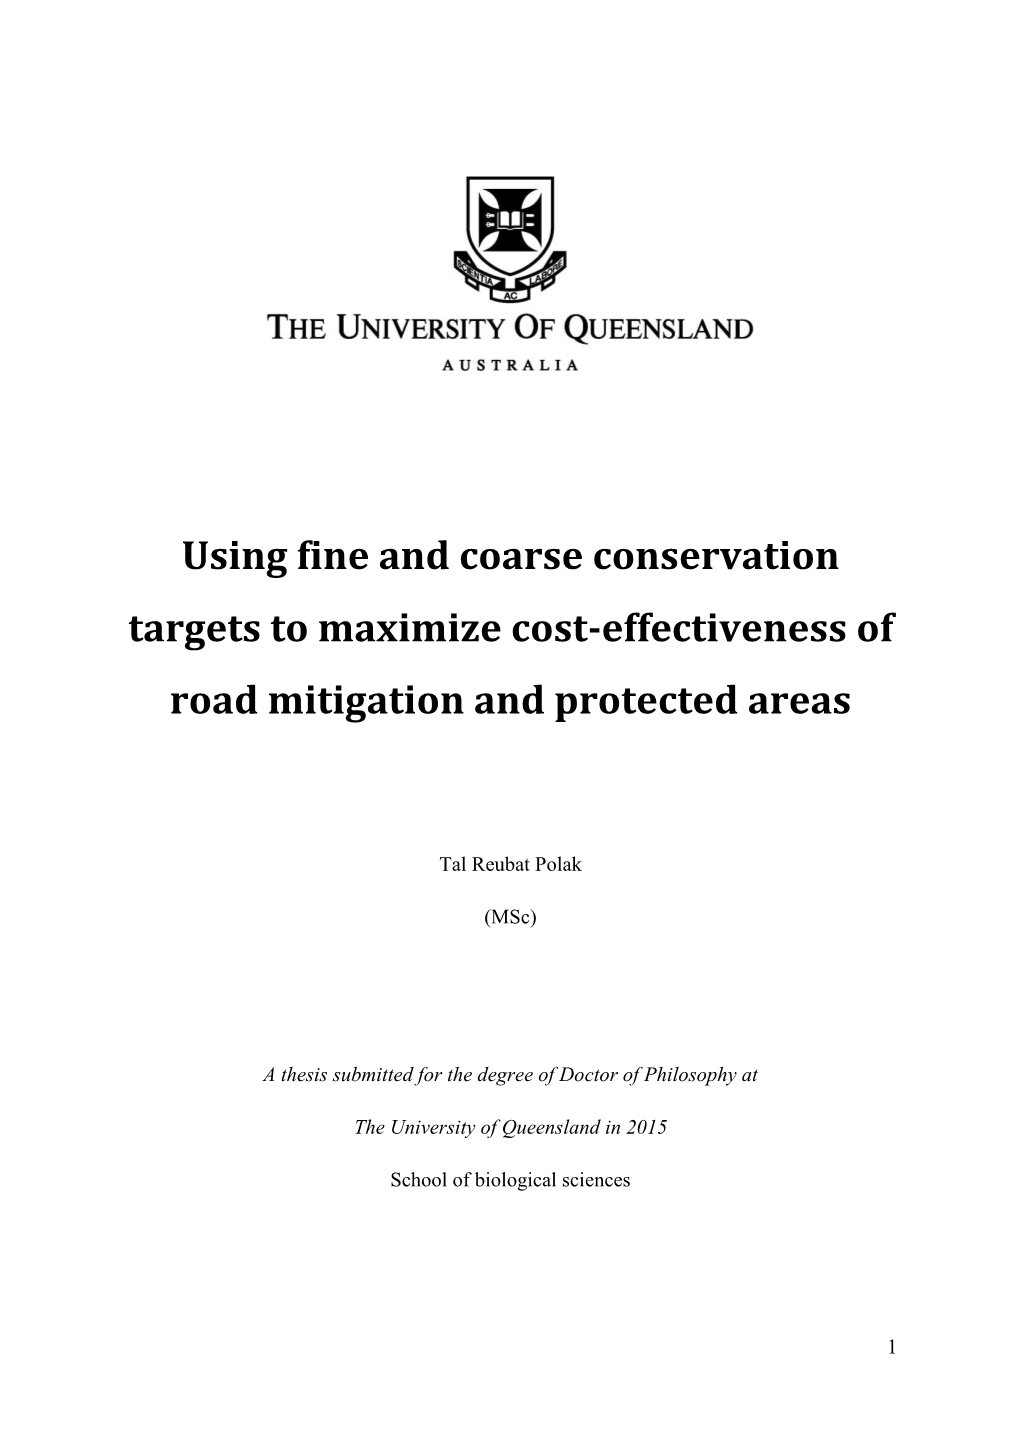 Using Fine and Coarse Conservation Targets to Maximize Cost-Effectiveness of Road Mitigation and Protected Areas